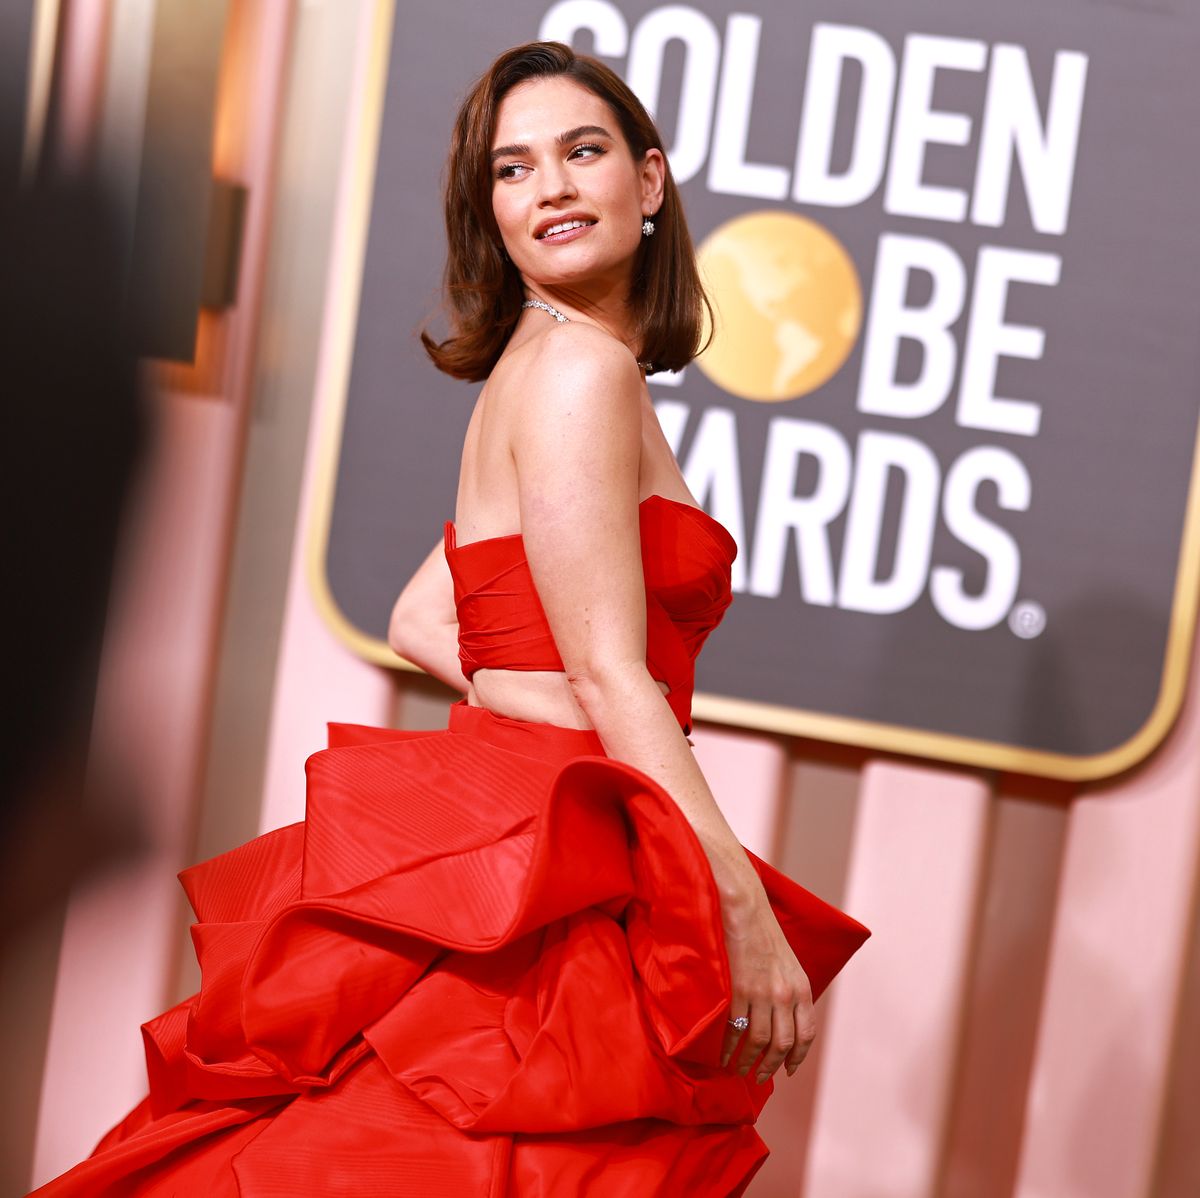 Golden globes 2023 red carpet: best dressed from Lily James to